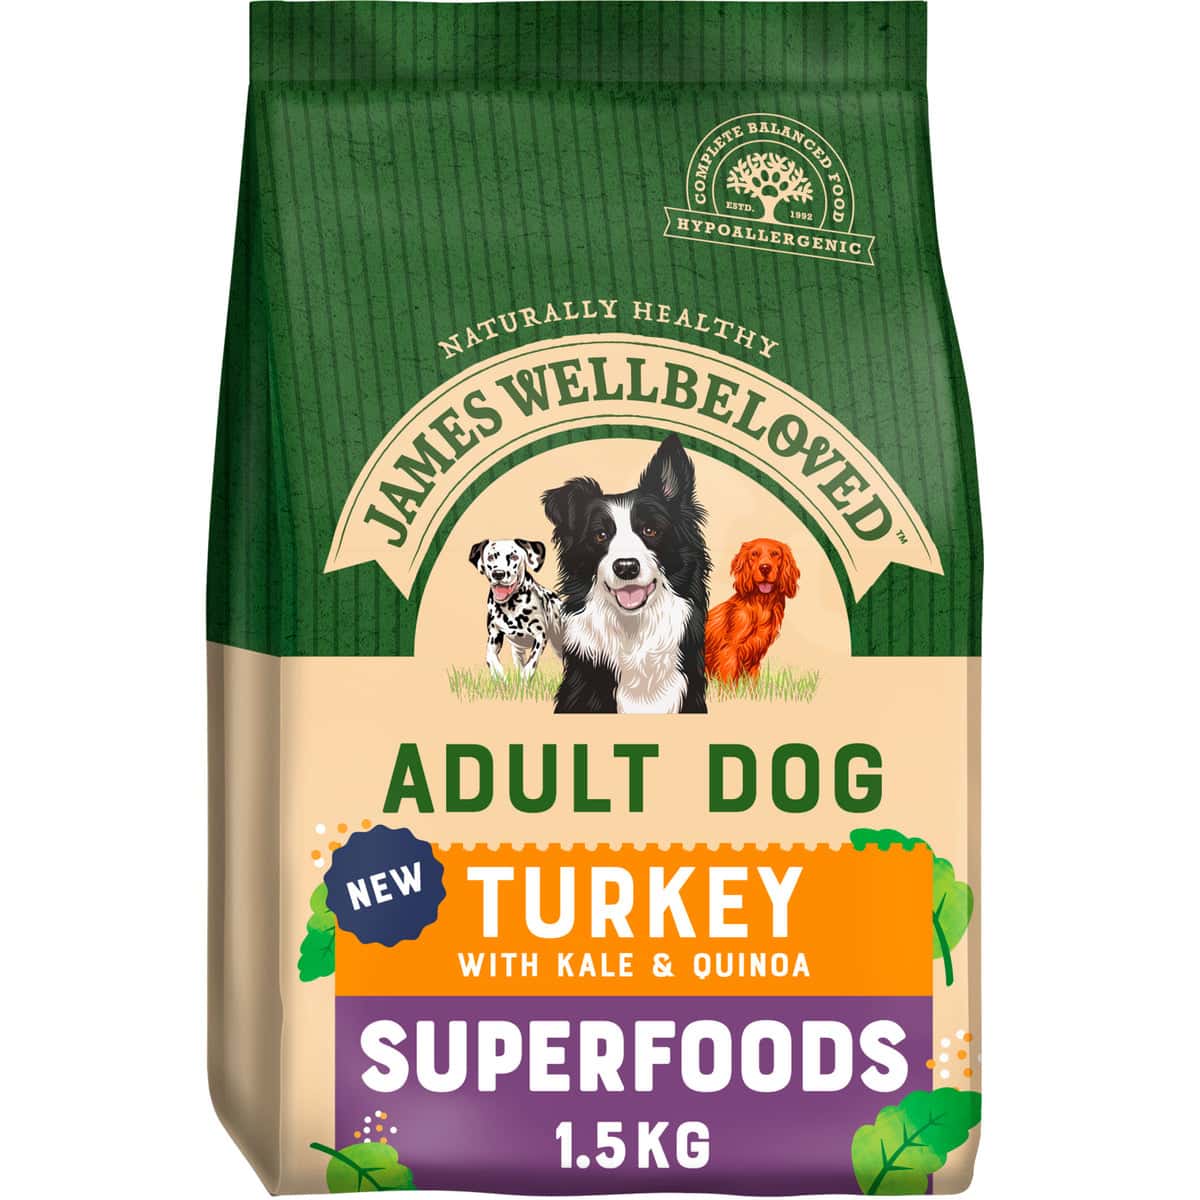 James Wellbeloved Superfoods – Adult Turkey – Pawfect Supplies Ltd Product Image